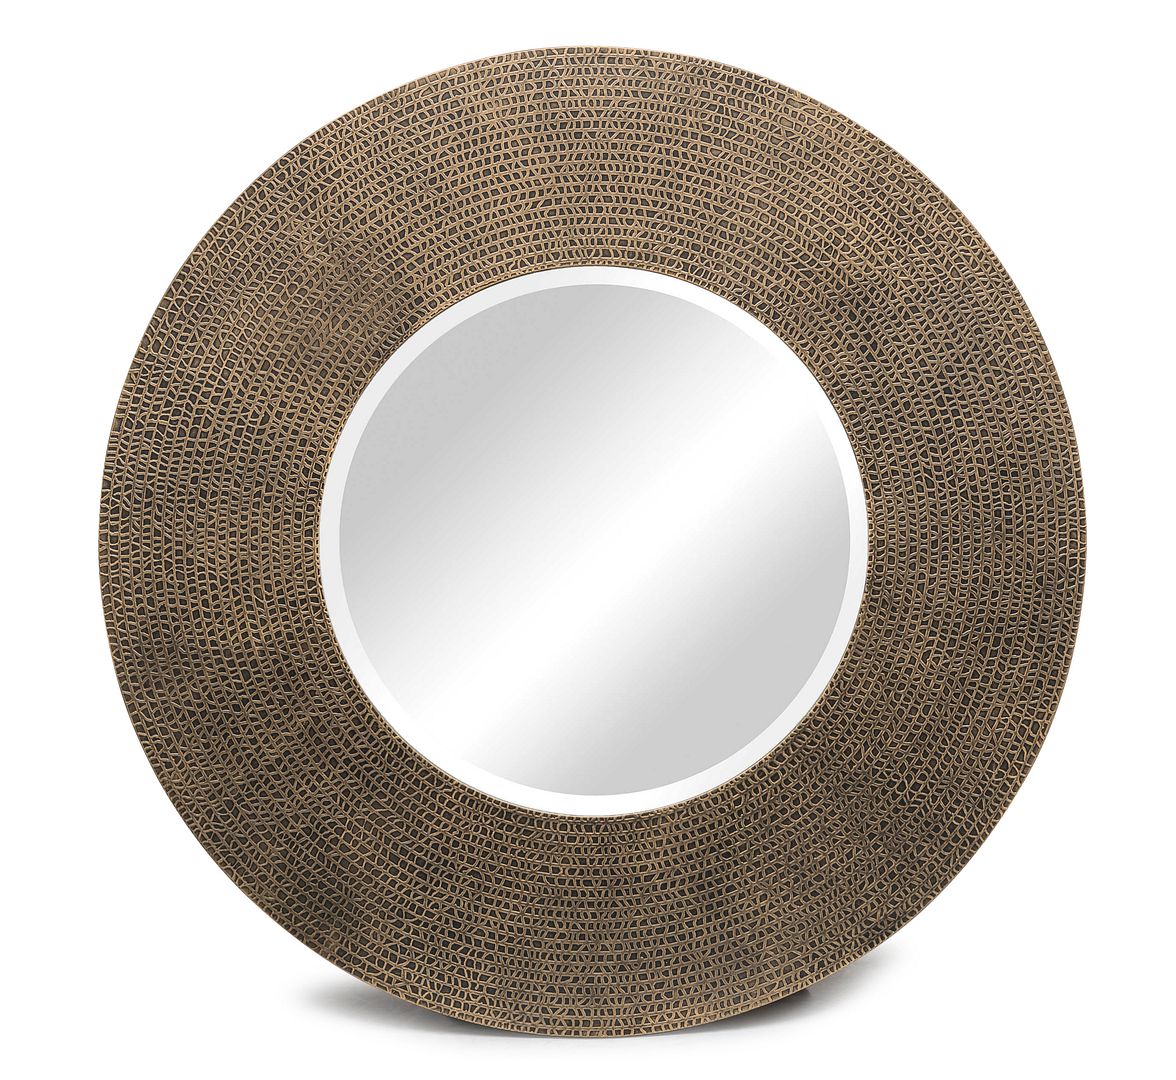 Round Croc Patterned Wall Mirror - Golden Black Finish